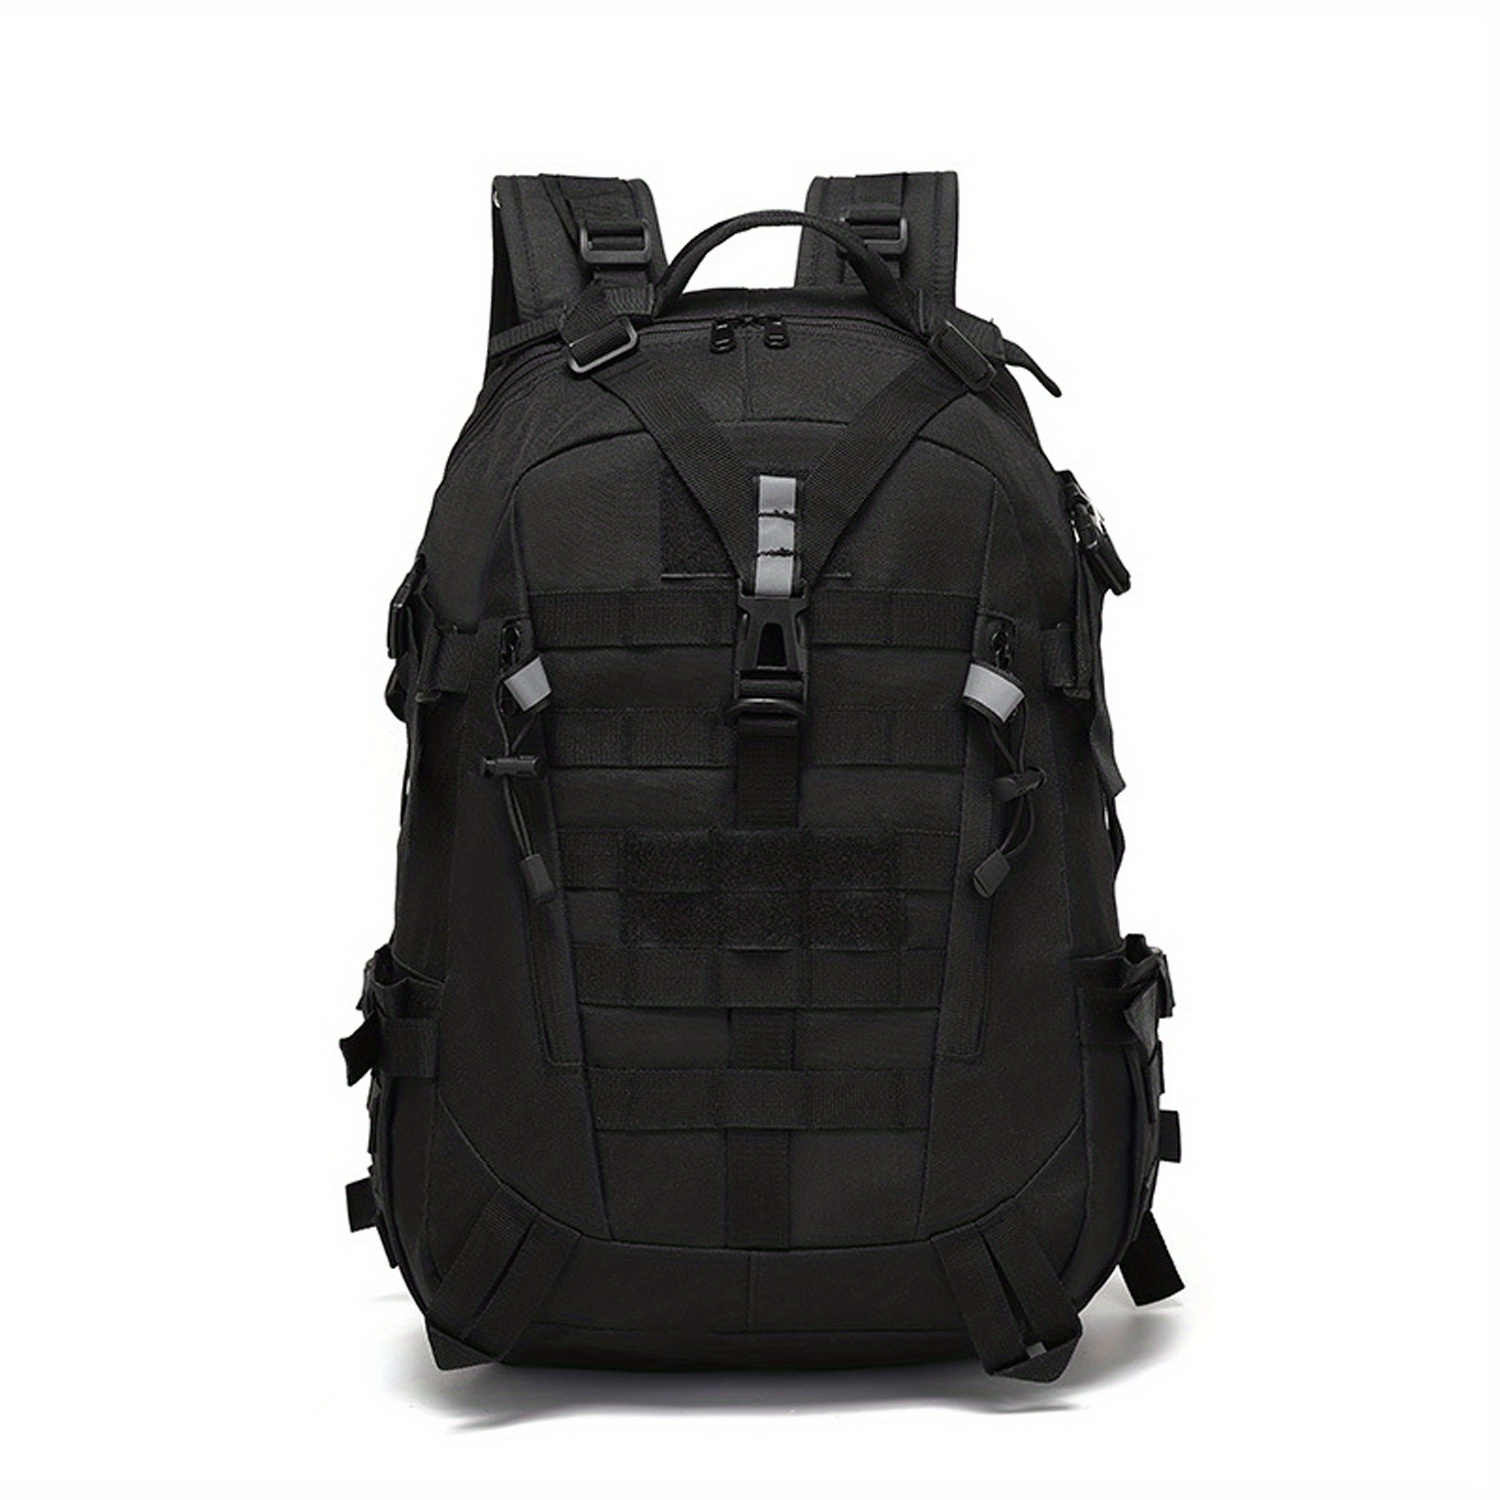 40L Outdoor Tactical Backpack Military Rucksack Detachable Pack with Velcro  Patch for Camping - $23.19 (Free S/H over $25)